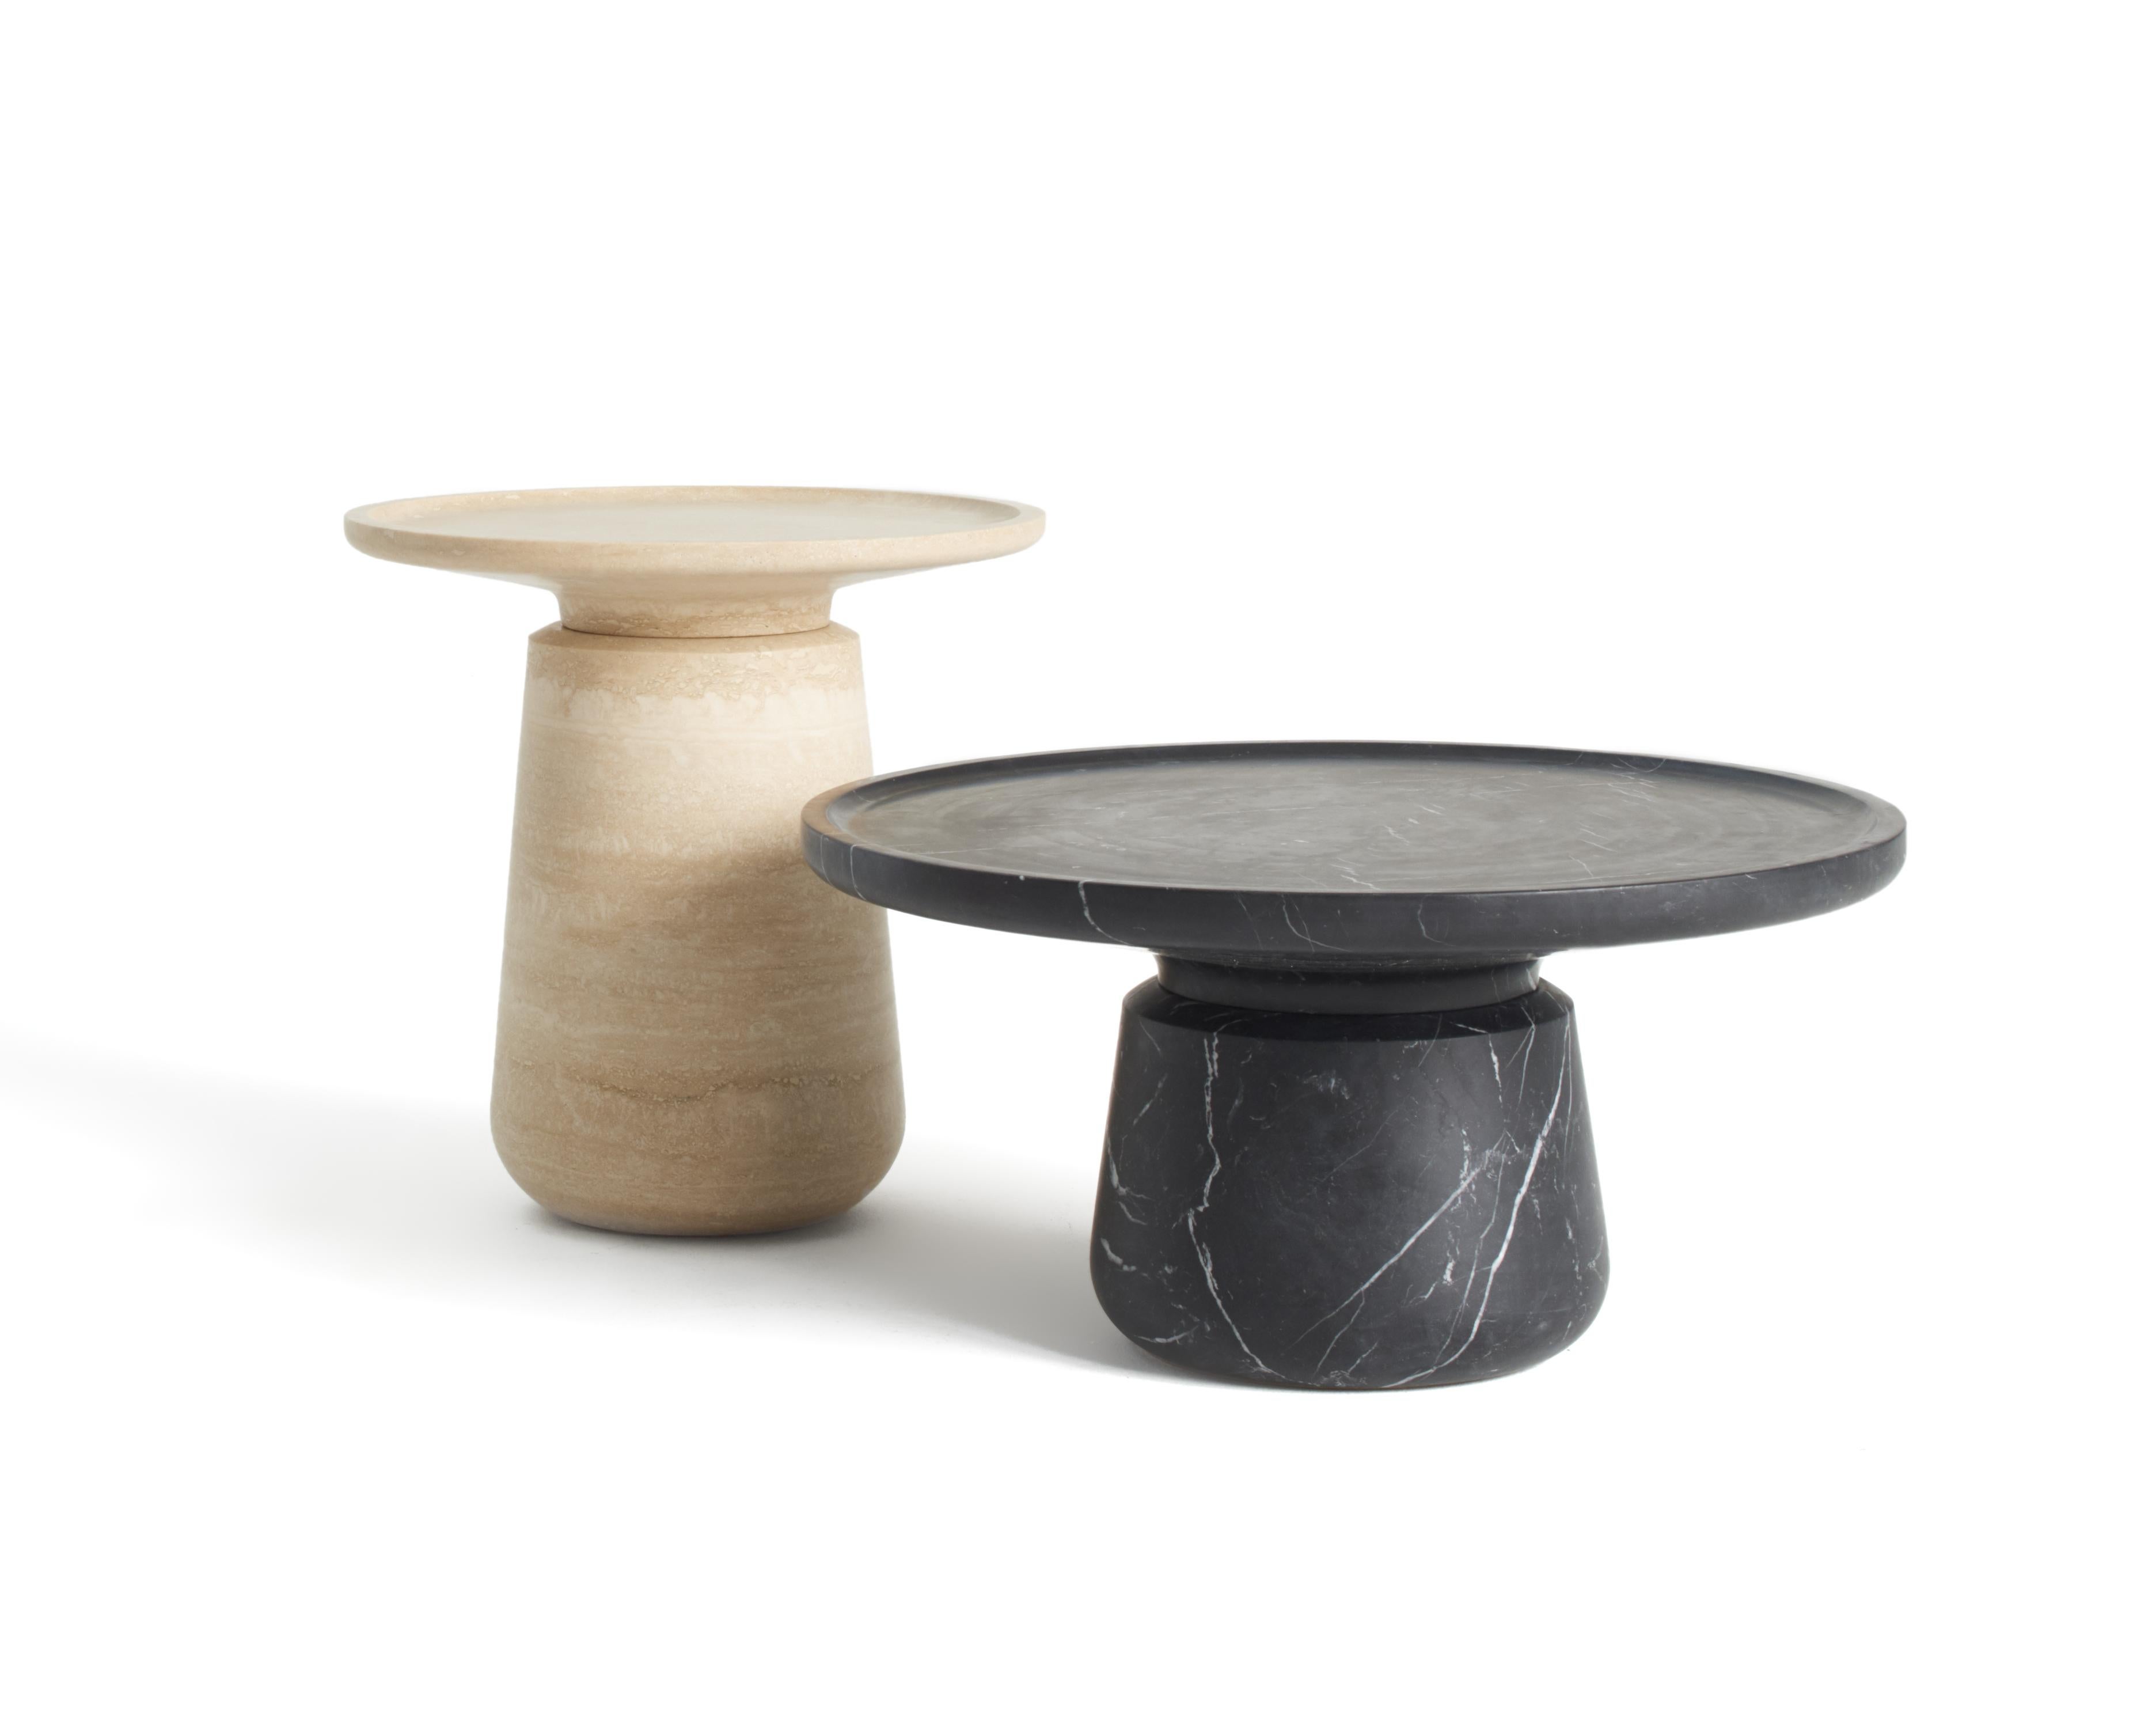 Set of 2 marble Altana side table by Ivan Colominas
Dimensions: 29.4 x 75 x 36, 23 x 54 x 54
Materials: Nero Marquinia, Travertino

Ivan Colominas studied Industrial Design at the UCH-CEU in Valencia, where he also attained a Master’s of